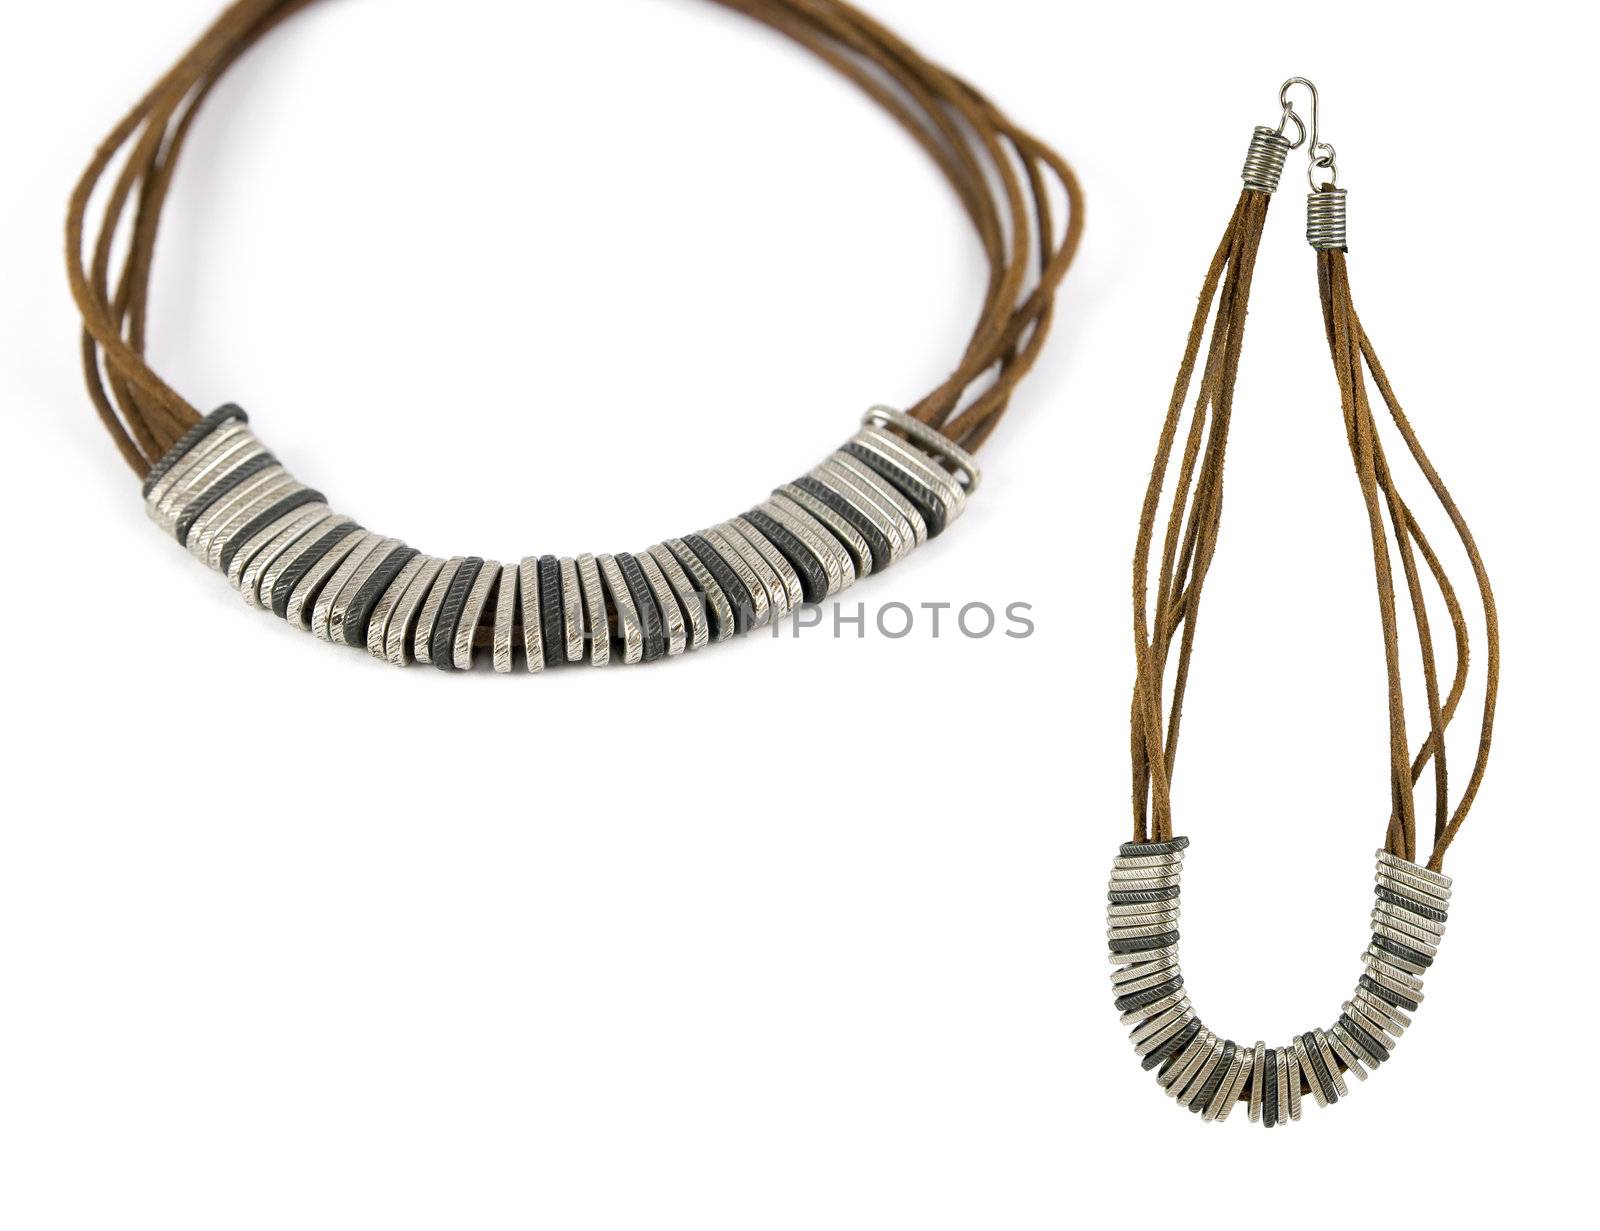 Metal pieces and raw leather stripes forming a beautiful necklace. Isolated over pure white. Copy-space.